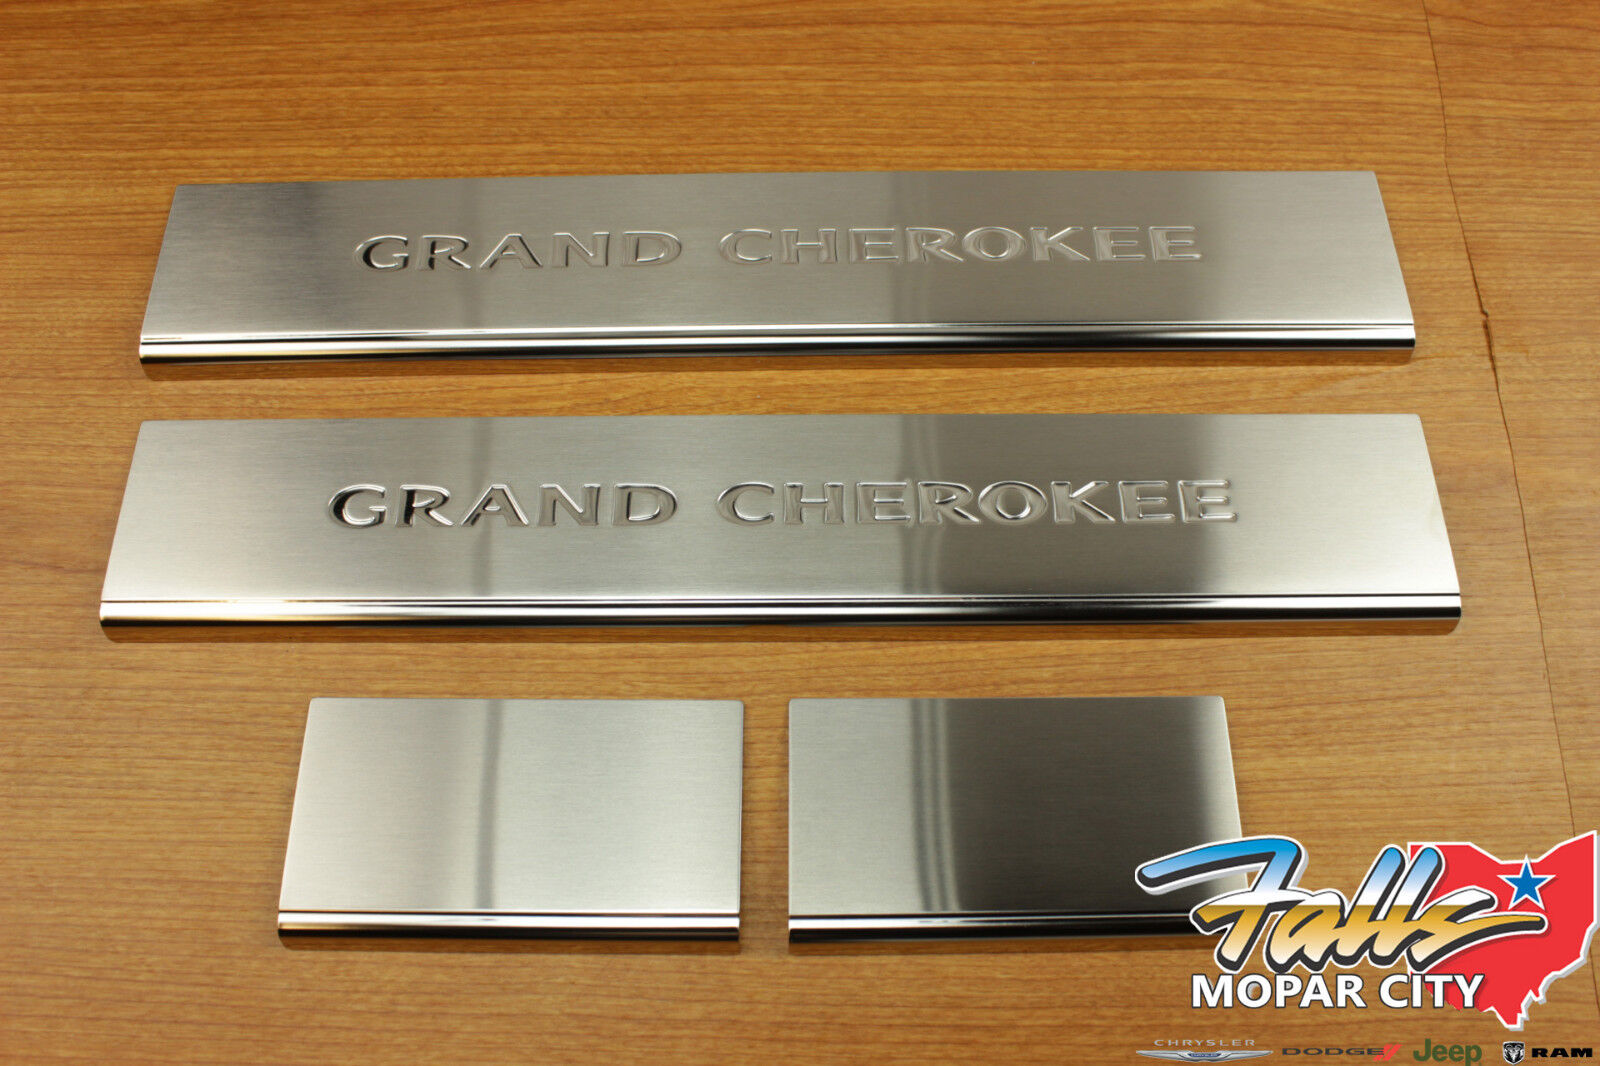 2011-2021 Jeep Grand Cherokee Stainless Steel Sill Guards Protectors Mopar OEM